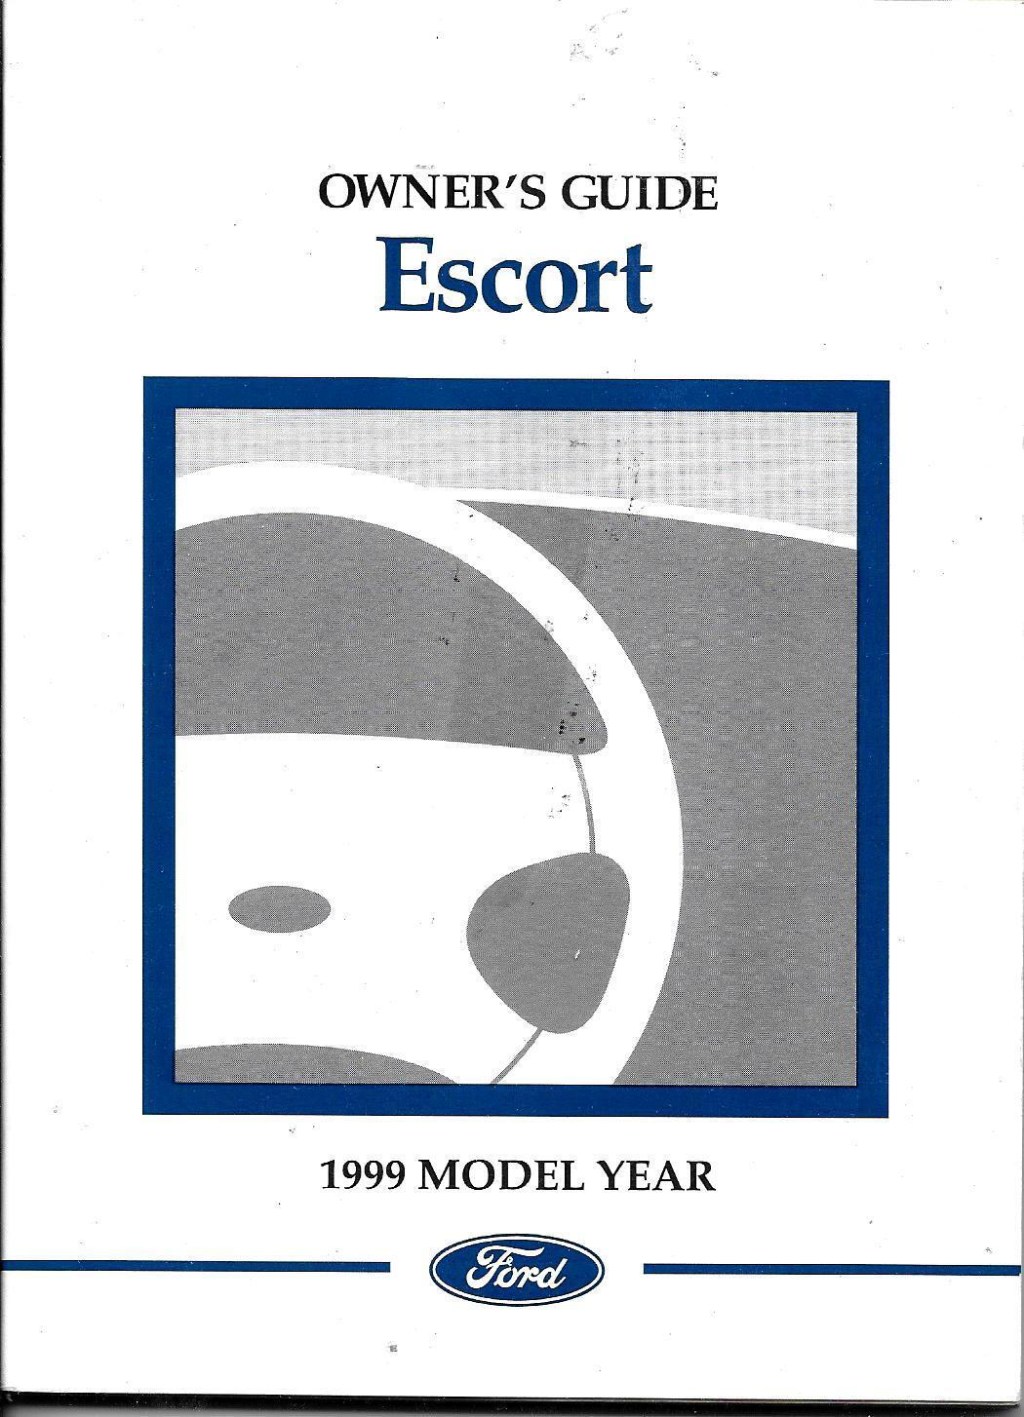 Picture of: Ford Escort Owner Guide, Manual, Servicing, Maintenance